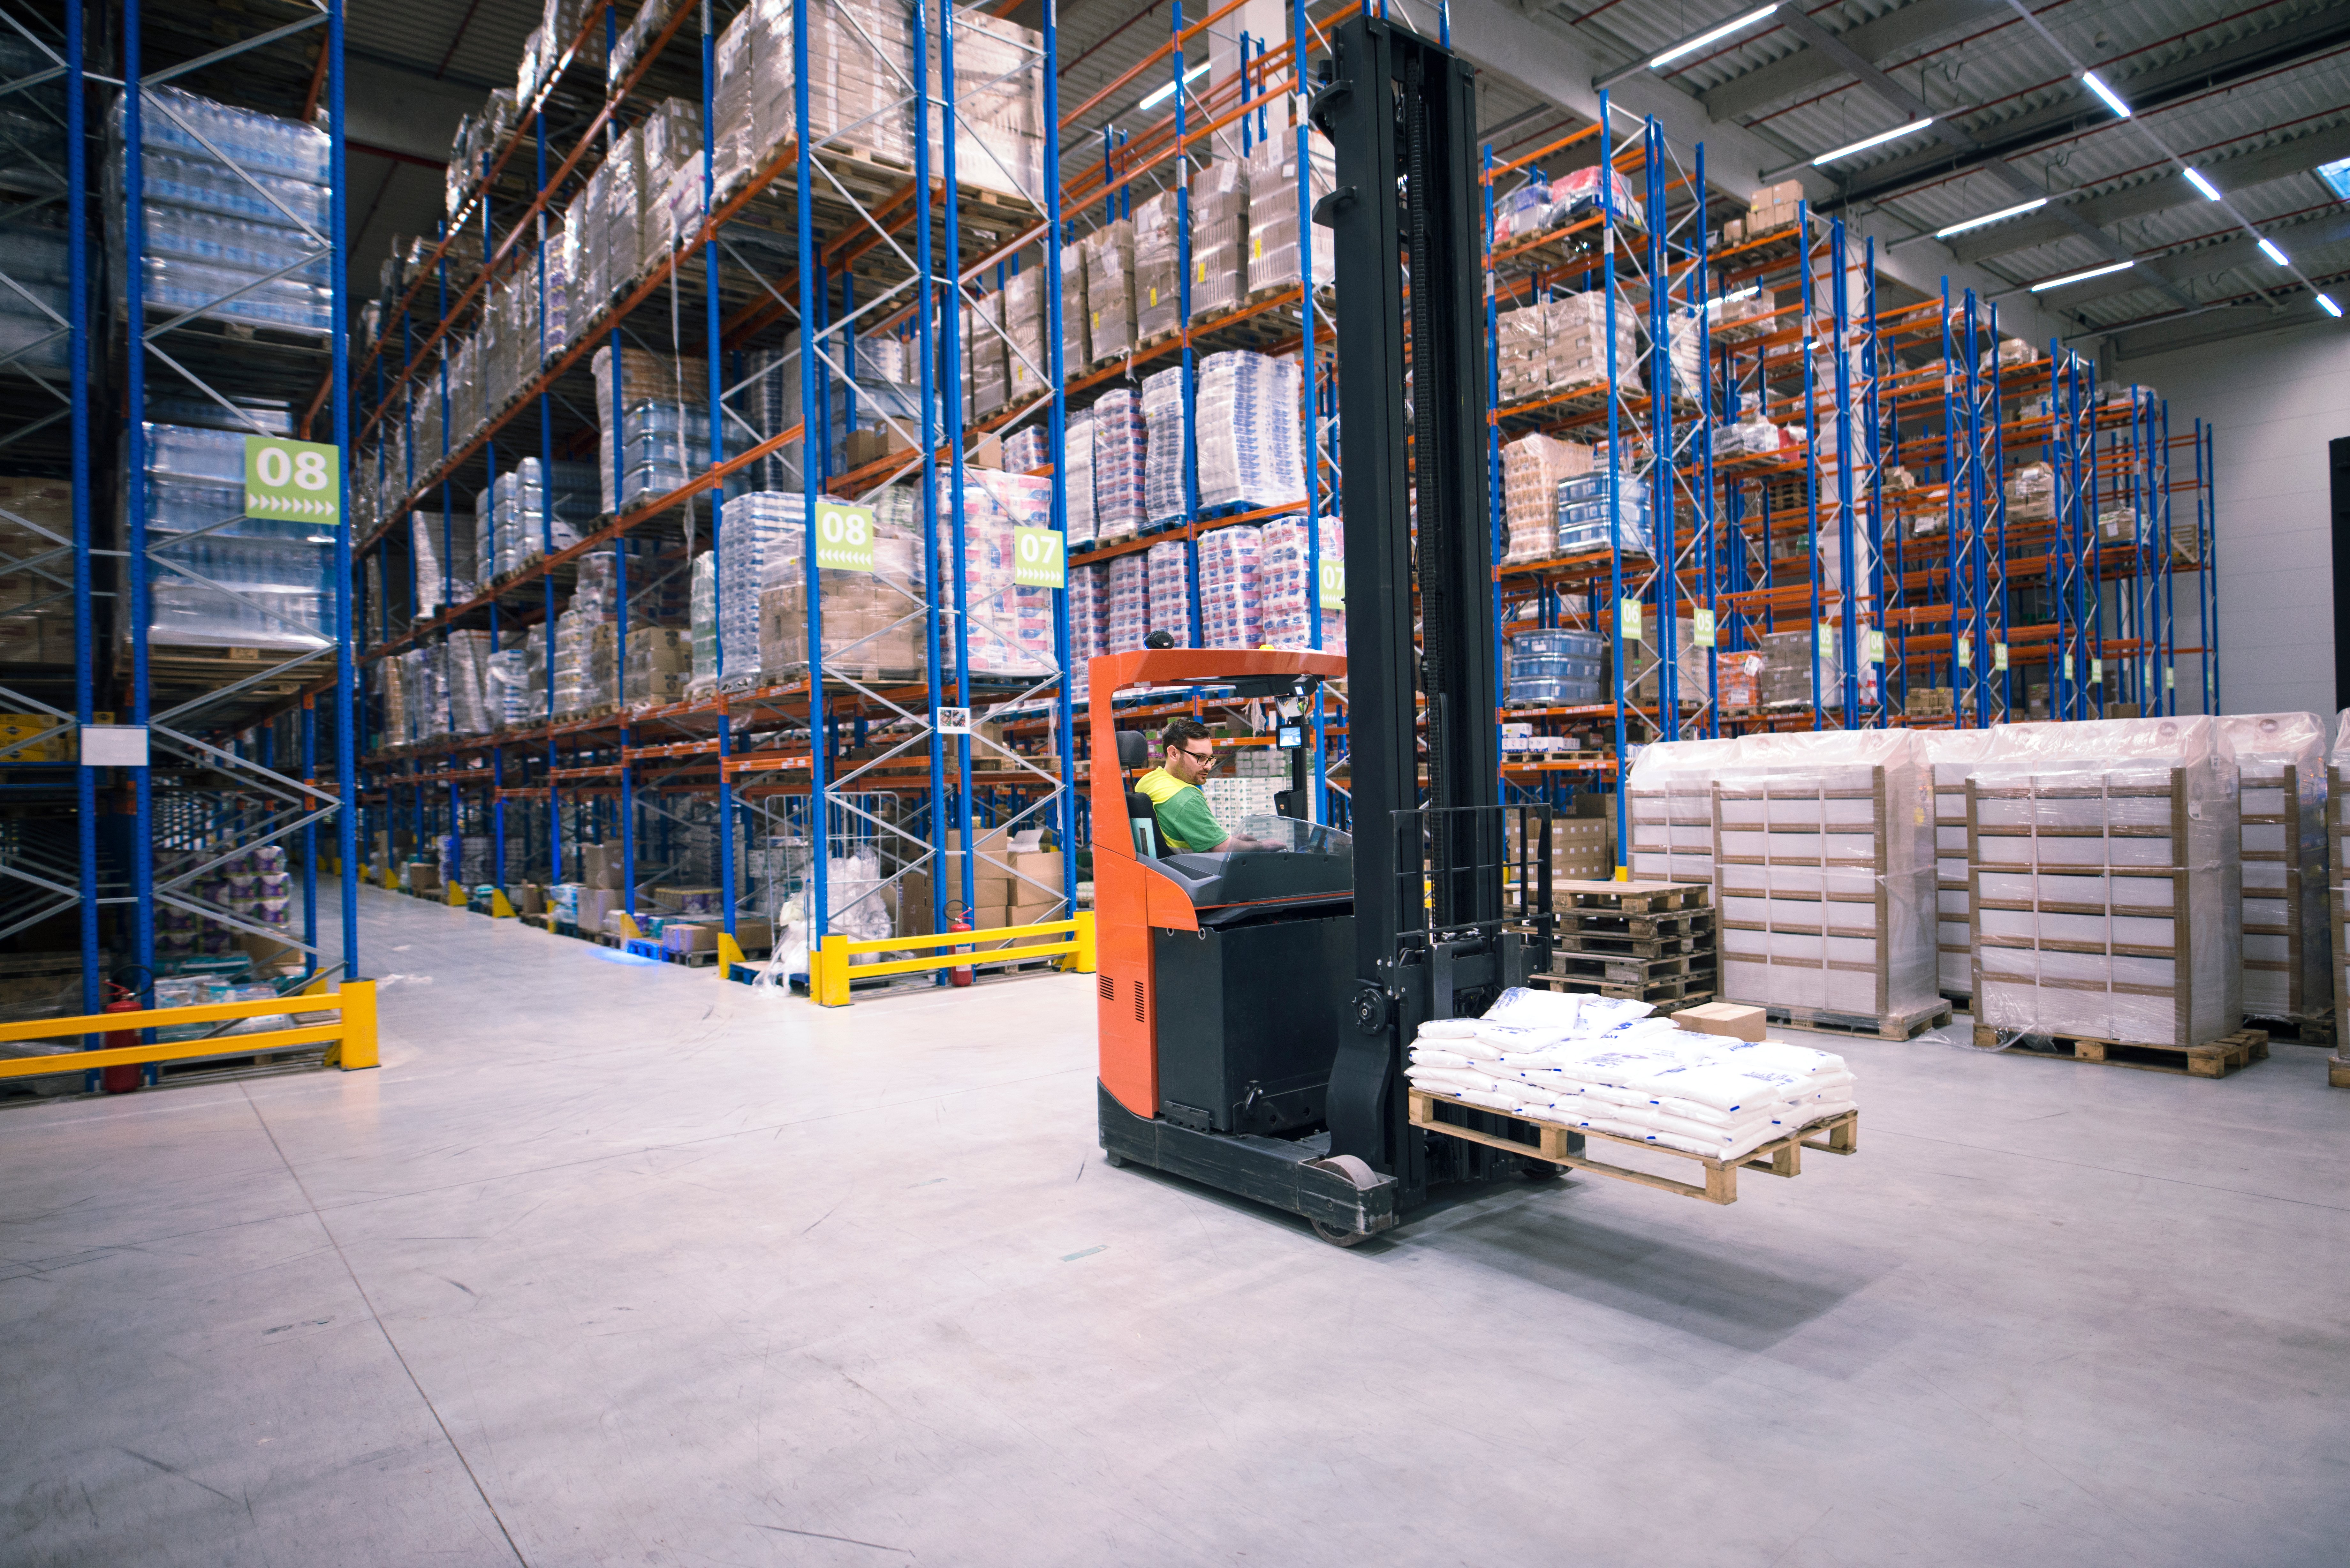 worker-operating-forklift-machine-relocating-goods-large-warehouse-center